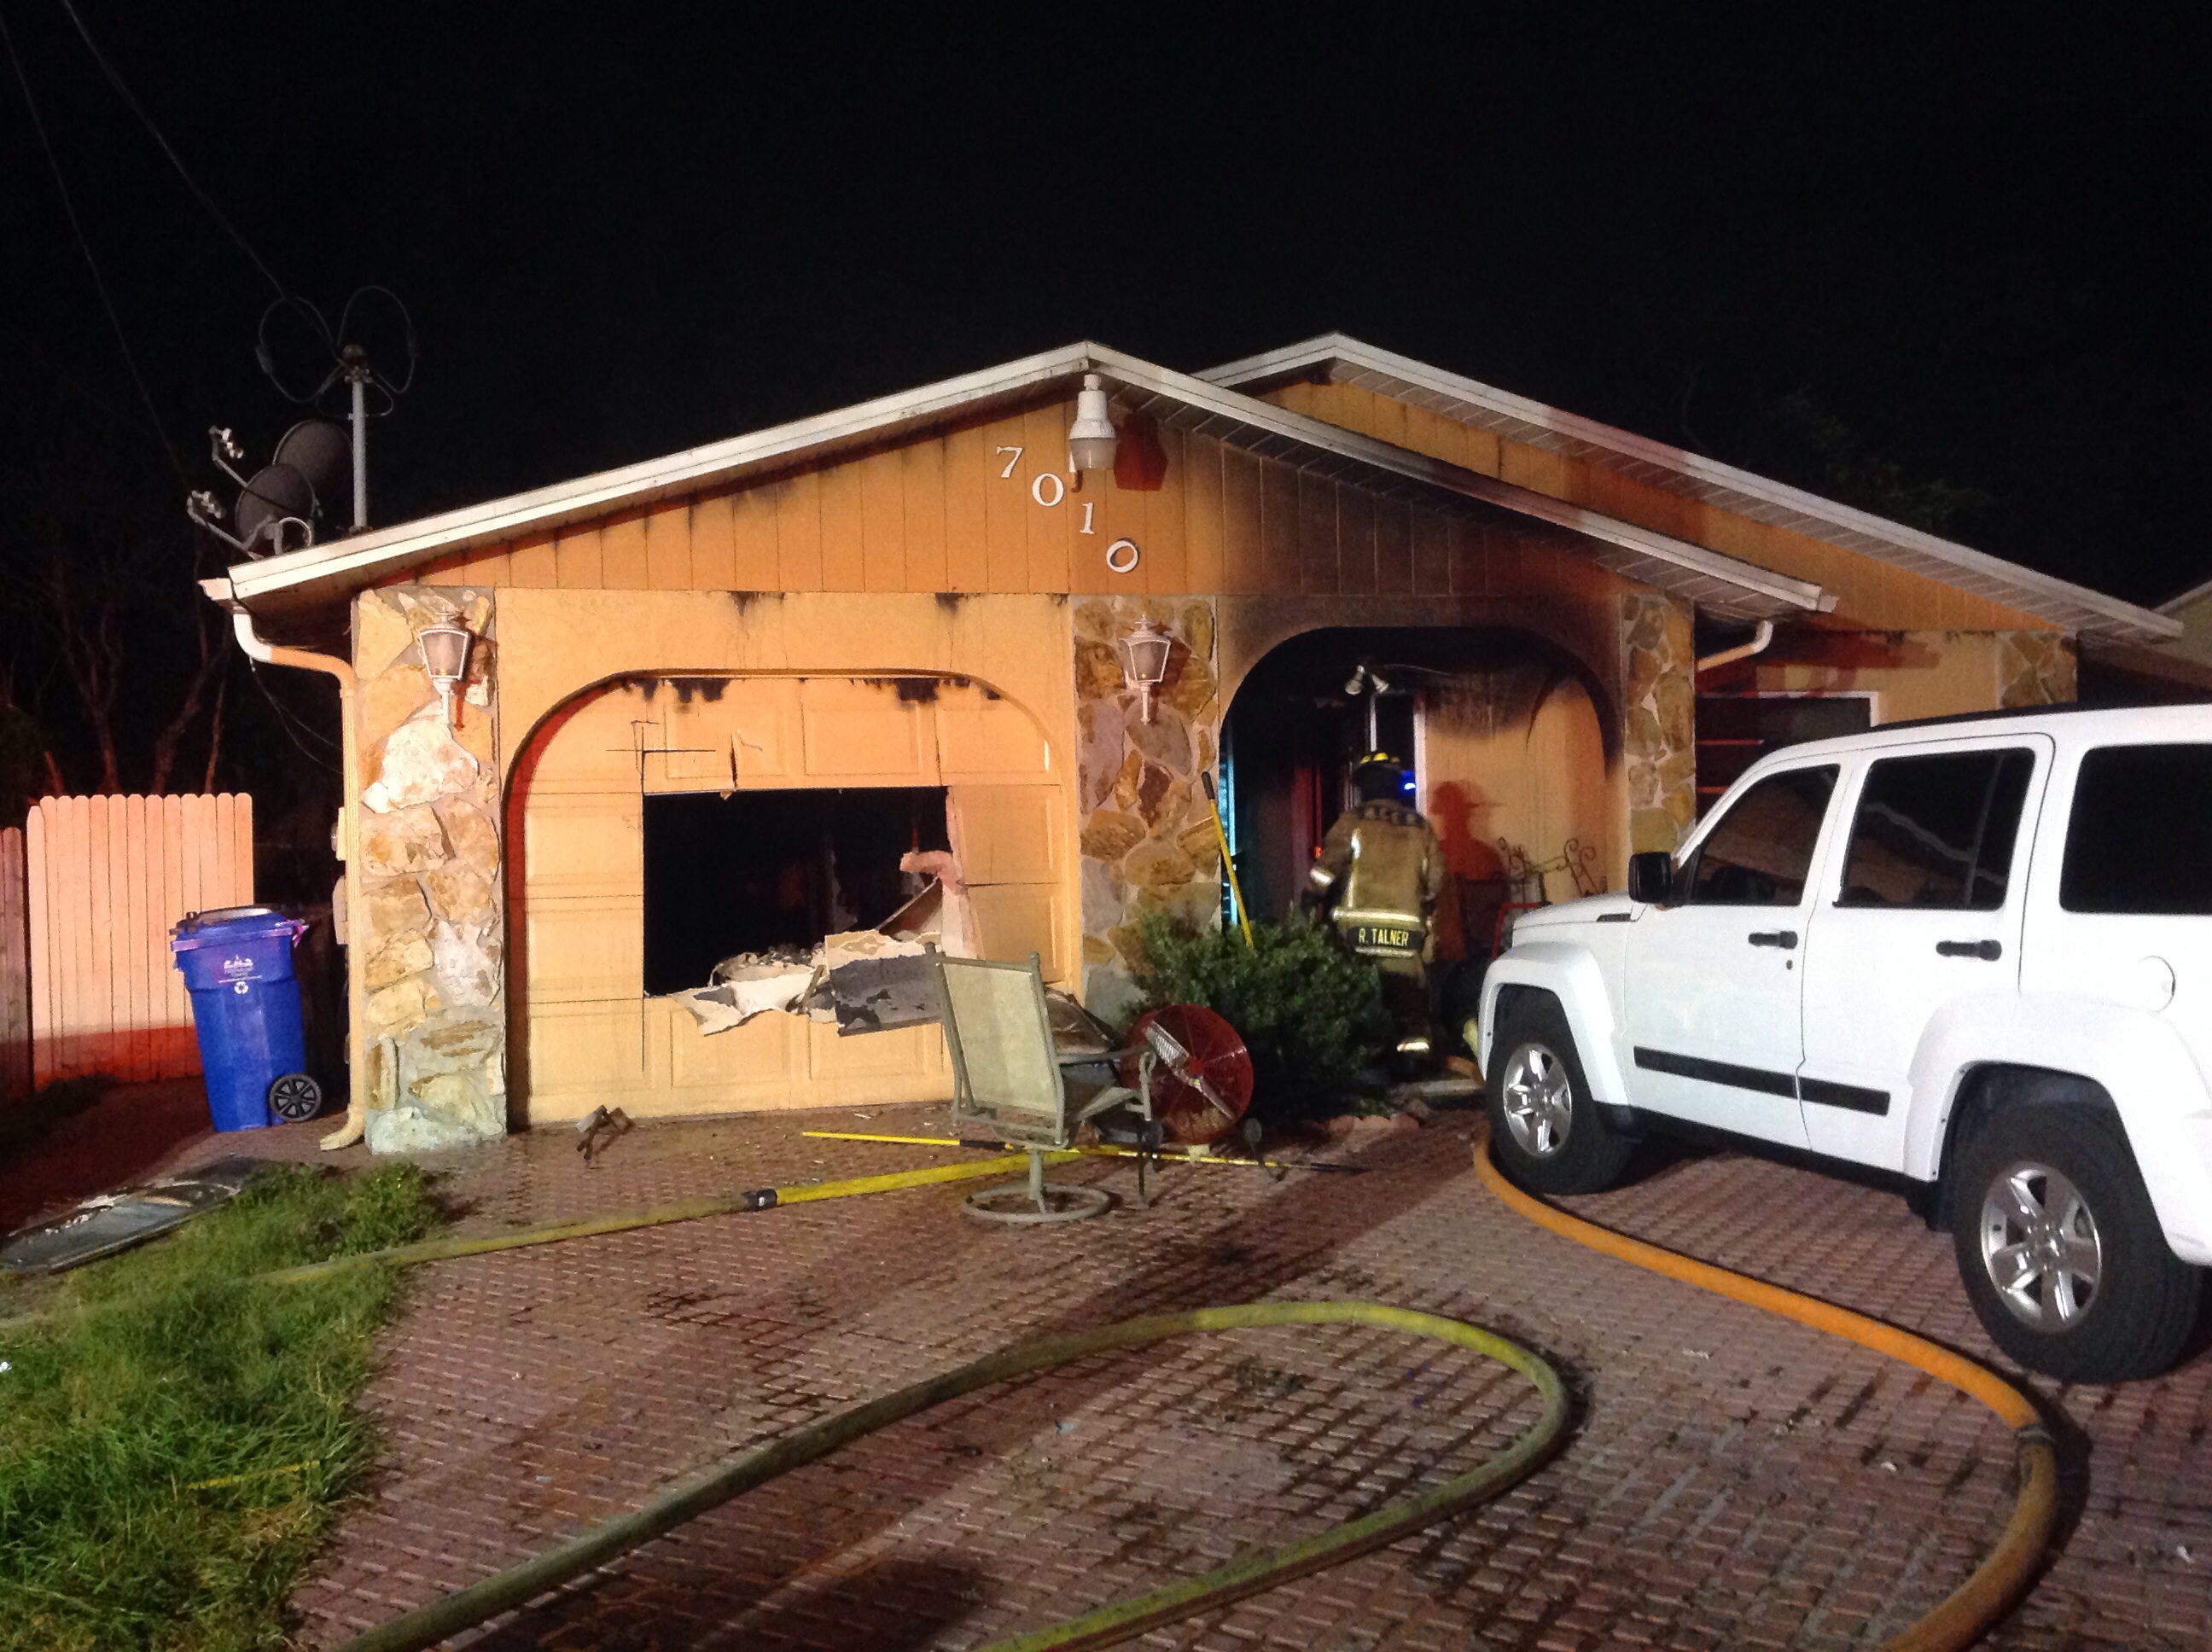 Tampa fire burns down home, occupants safe